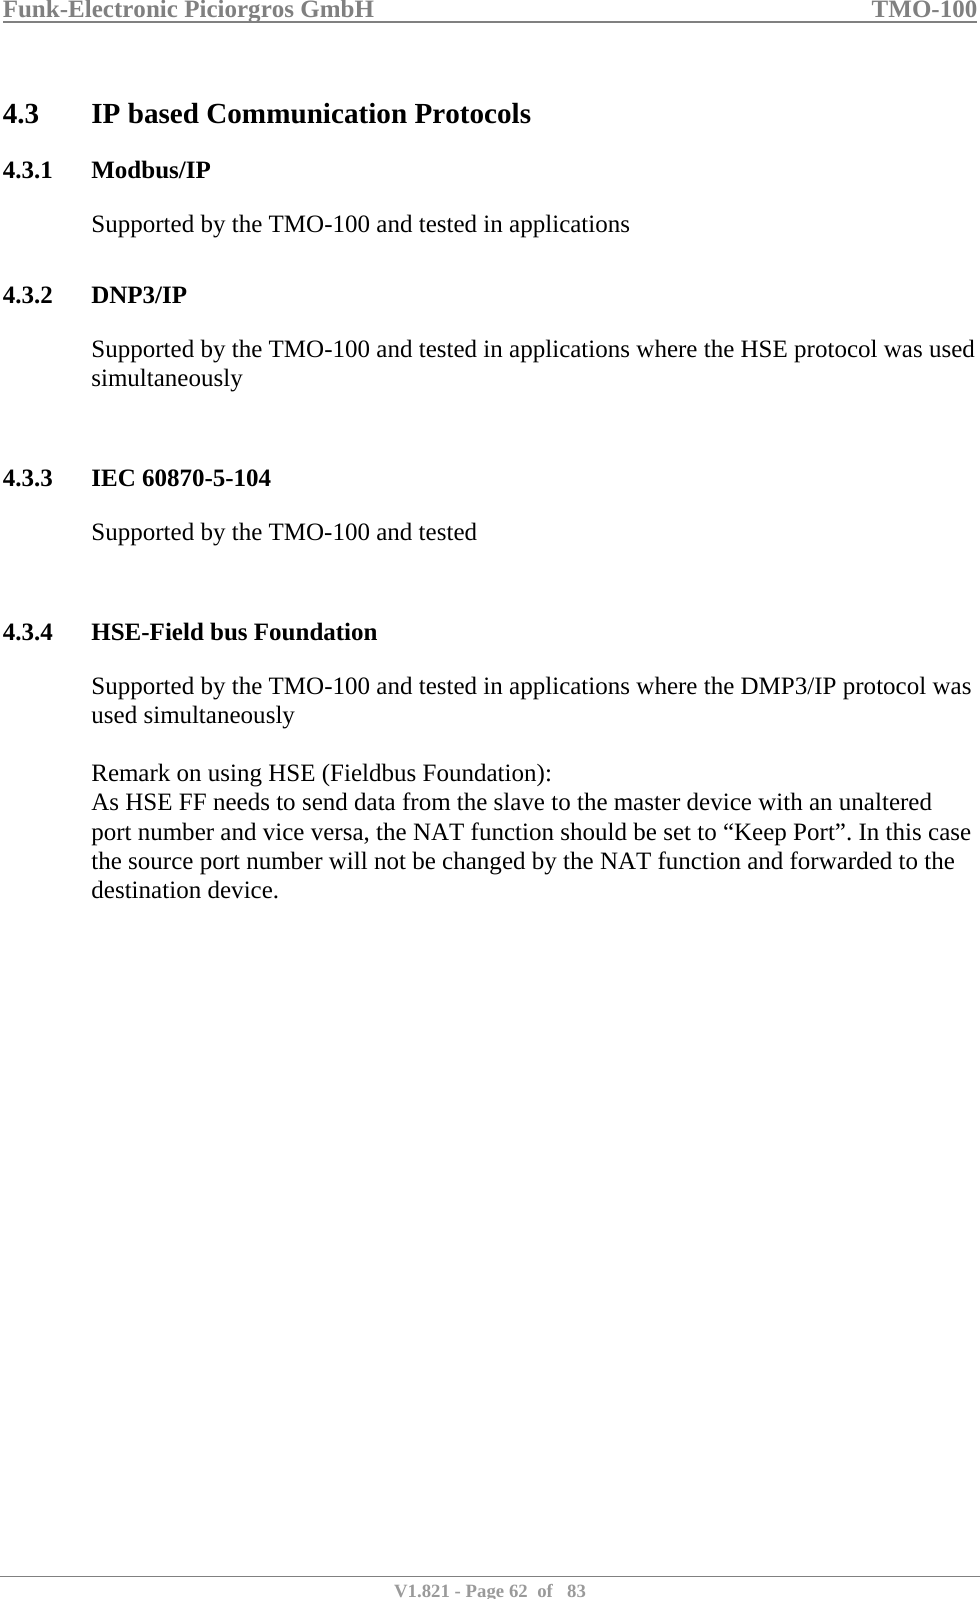 Funk-Electronic Piciorgros GmbH   TMO-100   V1.821 - Page 62  of   83   4.3 IP based Communication Protocols 4.3.1 Modbus/IP Supported by the TMO-100 and tested in applications  4.3.2 DNP3/IP Supported by the TMO-100 and tested in applications where the HSE protocol was used simultaneously   4.3.3 IEC 60870-5-104 Supported by the TMO-100 and tested   4.3.4 HSE-Field bus Foundation Supported by the TMO-100 and tested in applications where the DMP3/IP protocol was used simultaneously  Remark on using HSE (Fieldbus Foundation): As HSE FF needs to send data from the slave to the master device with an unaltered port number and vice versa, the NAT function should be set to “Keep Port”. In this case the source port number will not be changed by the NAT function and forwarded to the destination device.   